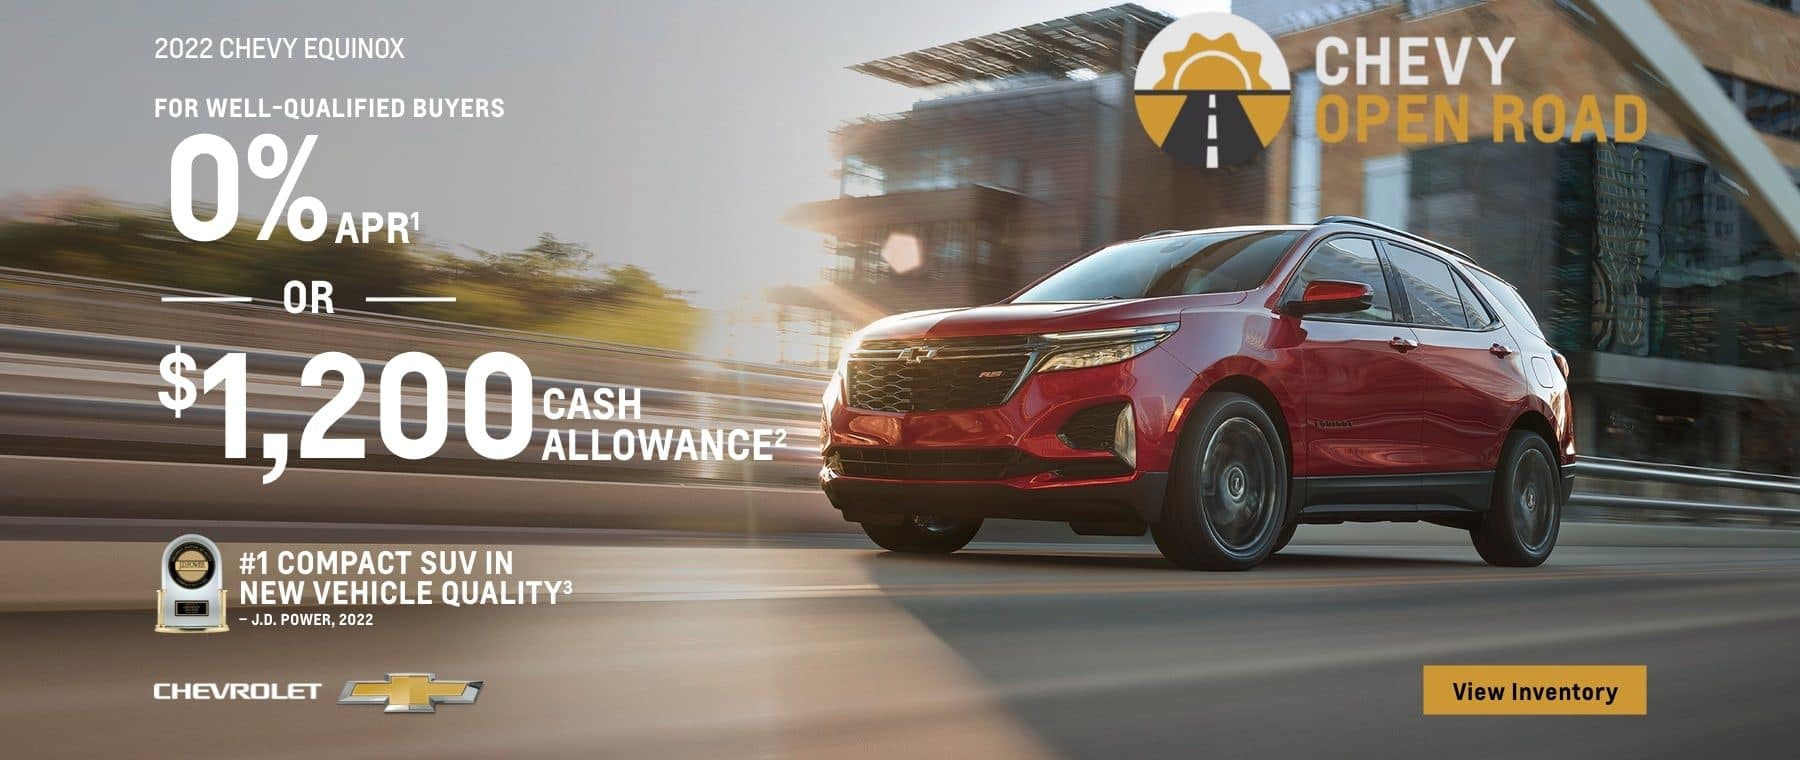 2022 Chevy Equinox. Chevy Open Road. For well-qualified buyers 0% APR. Or, $1,200 cash allowance.